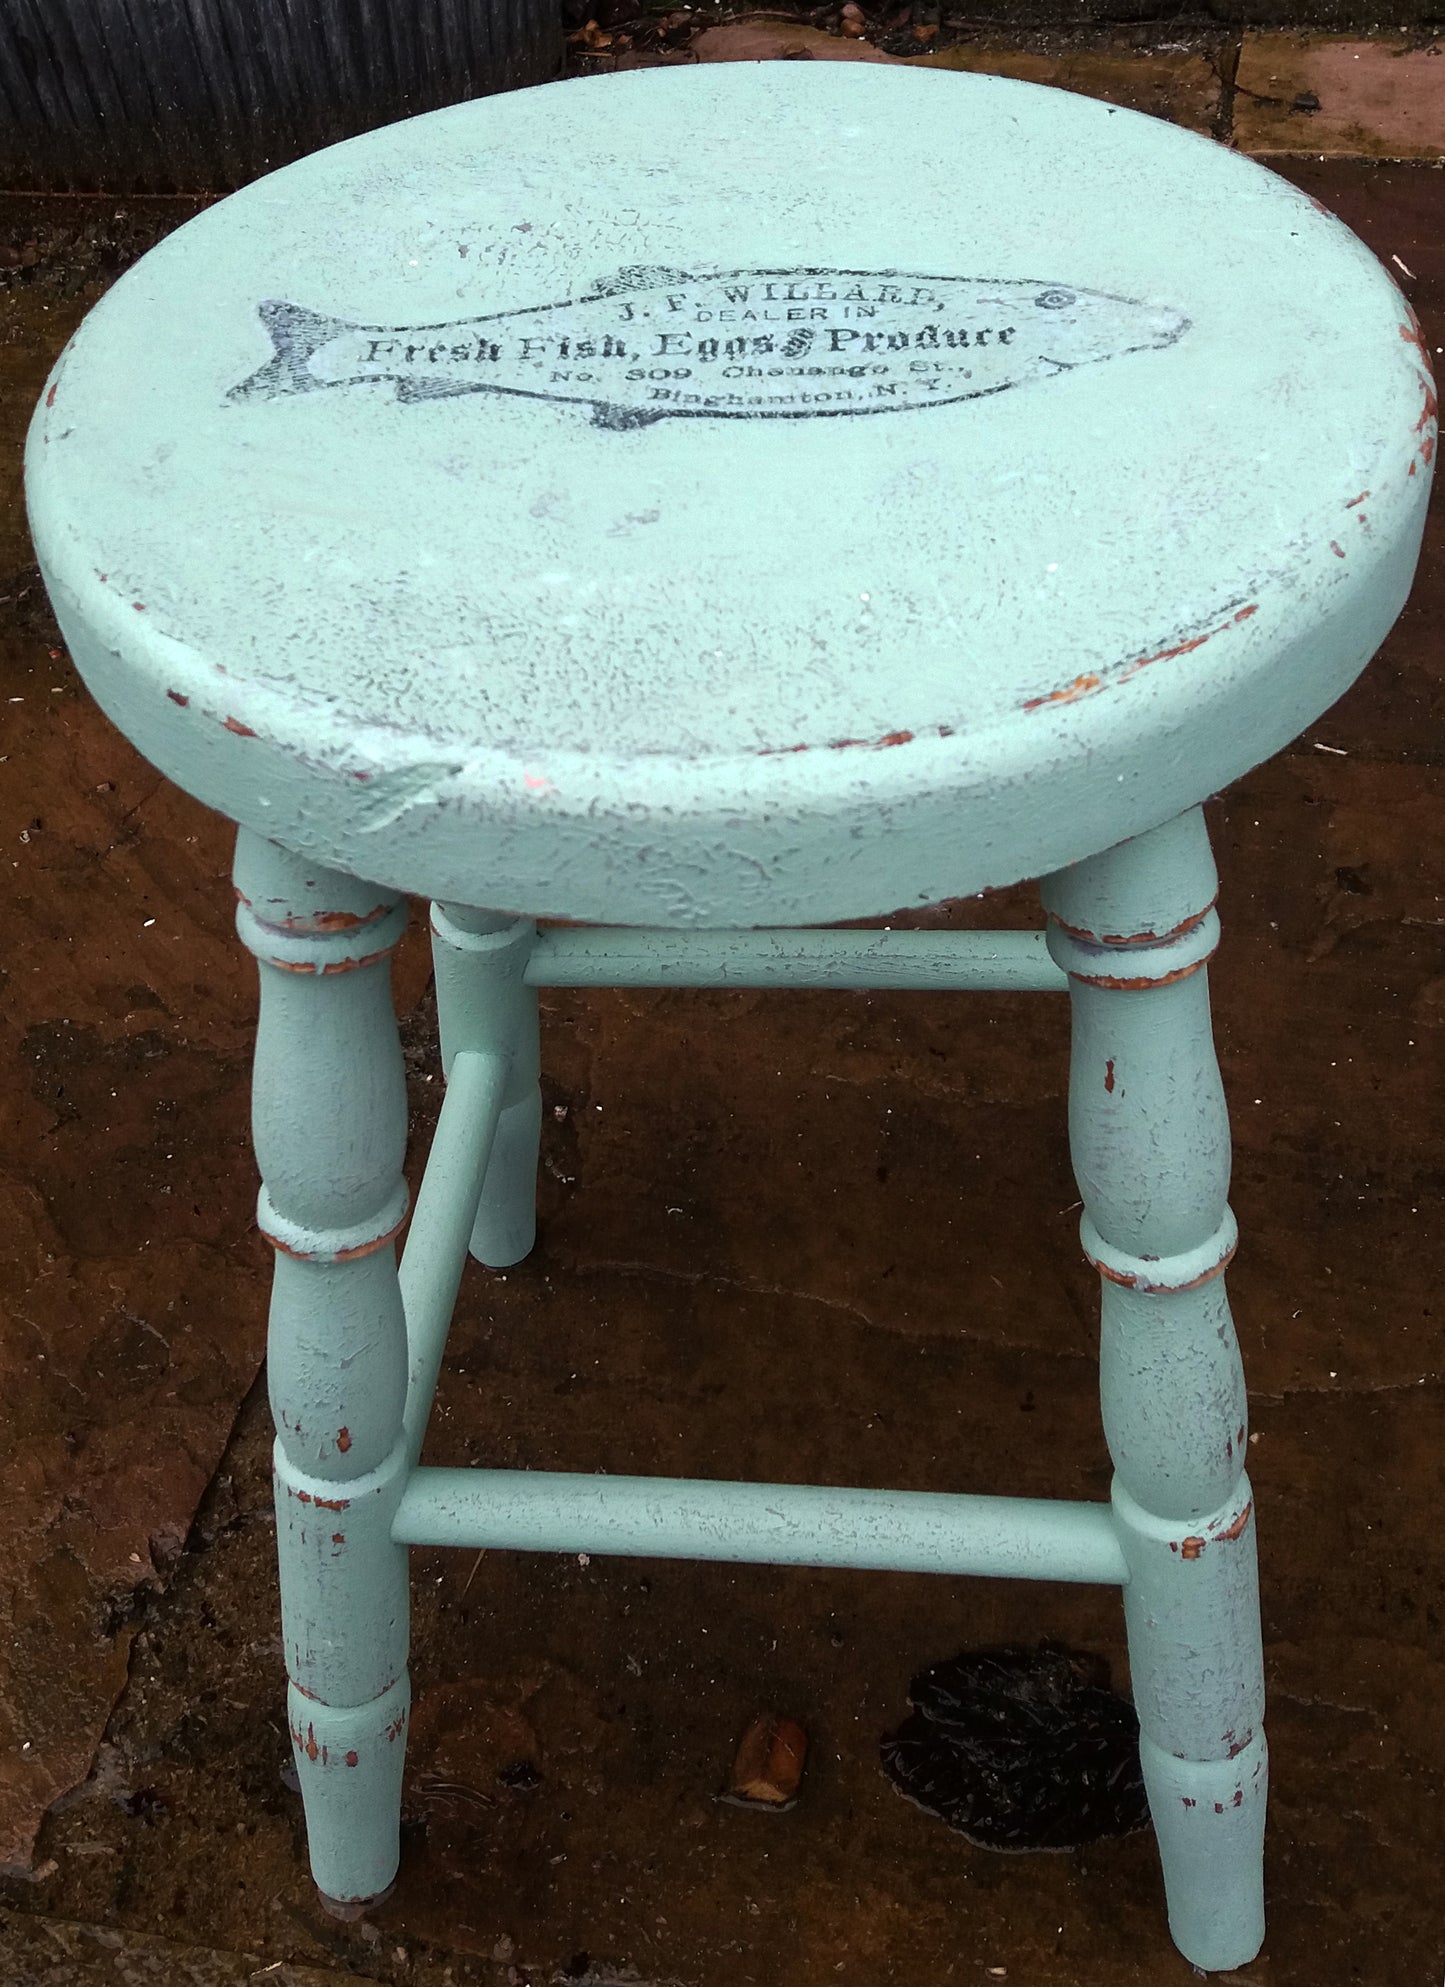 Vintage wooden stool painted in layers of textured paint with fish motif